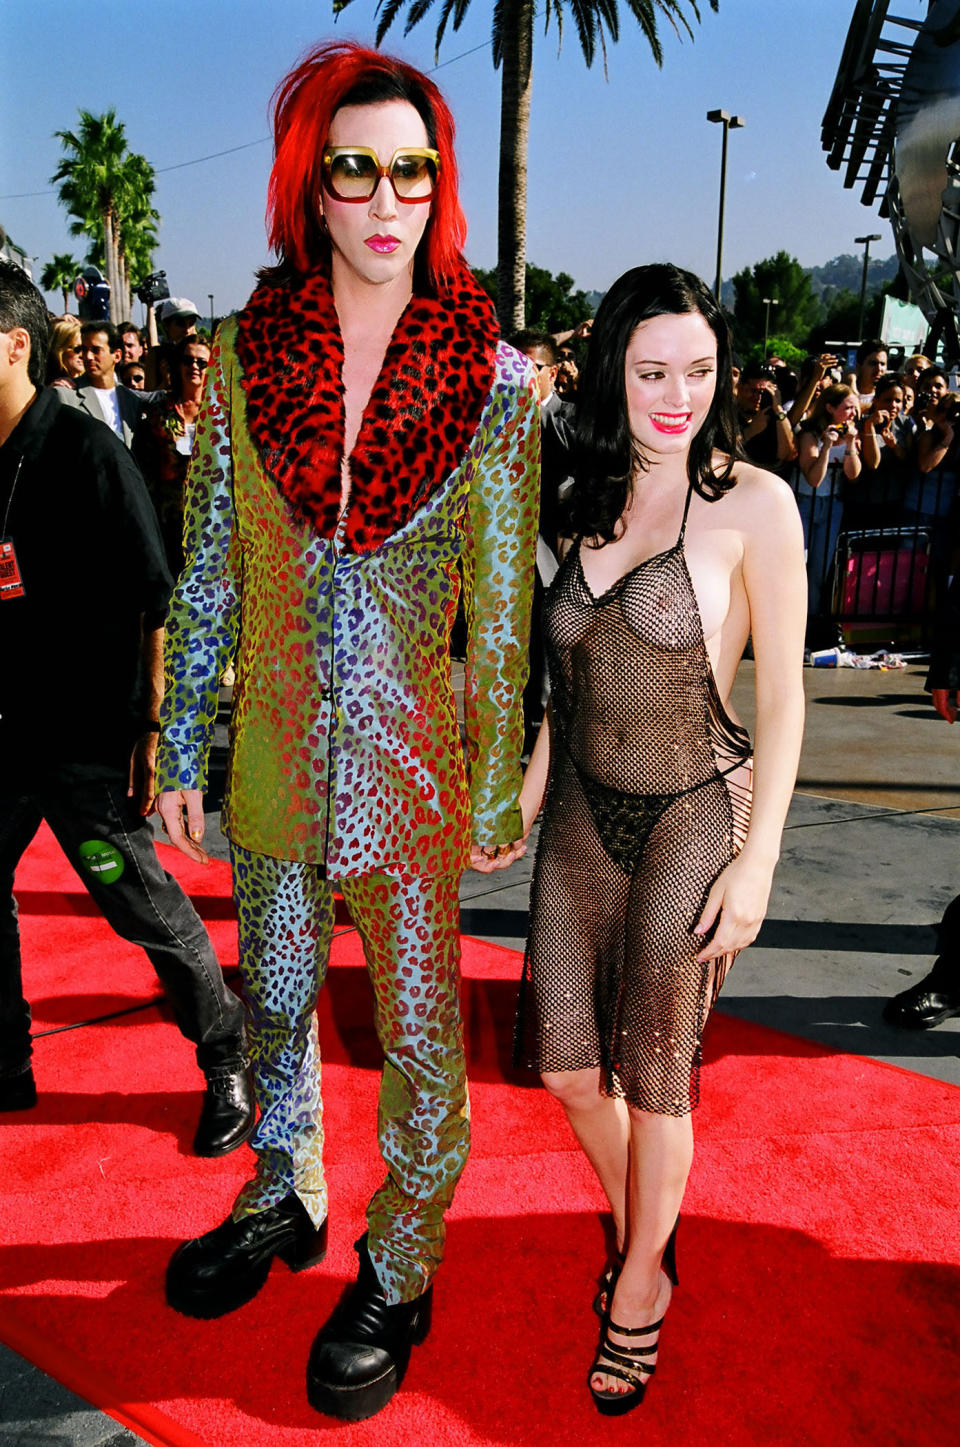 Marilyn Manson and Rose McGowan during 1998 MTV Video Music Award Arrivals at Universal Studios in Universal City, CA, United States. (Photo by Jeff Kravitz/FilmMagic, Inc)